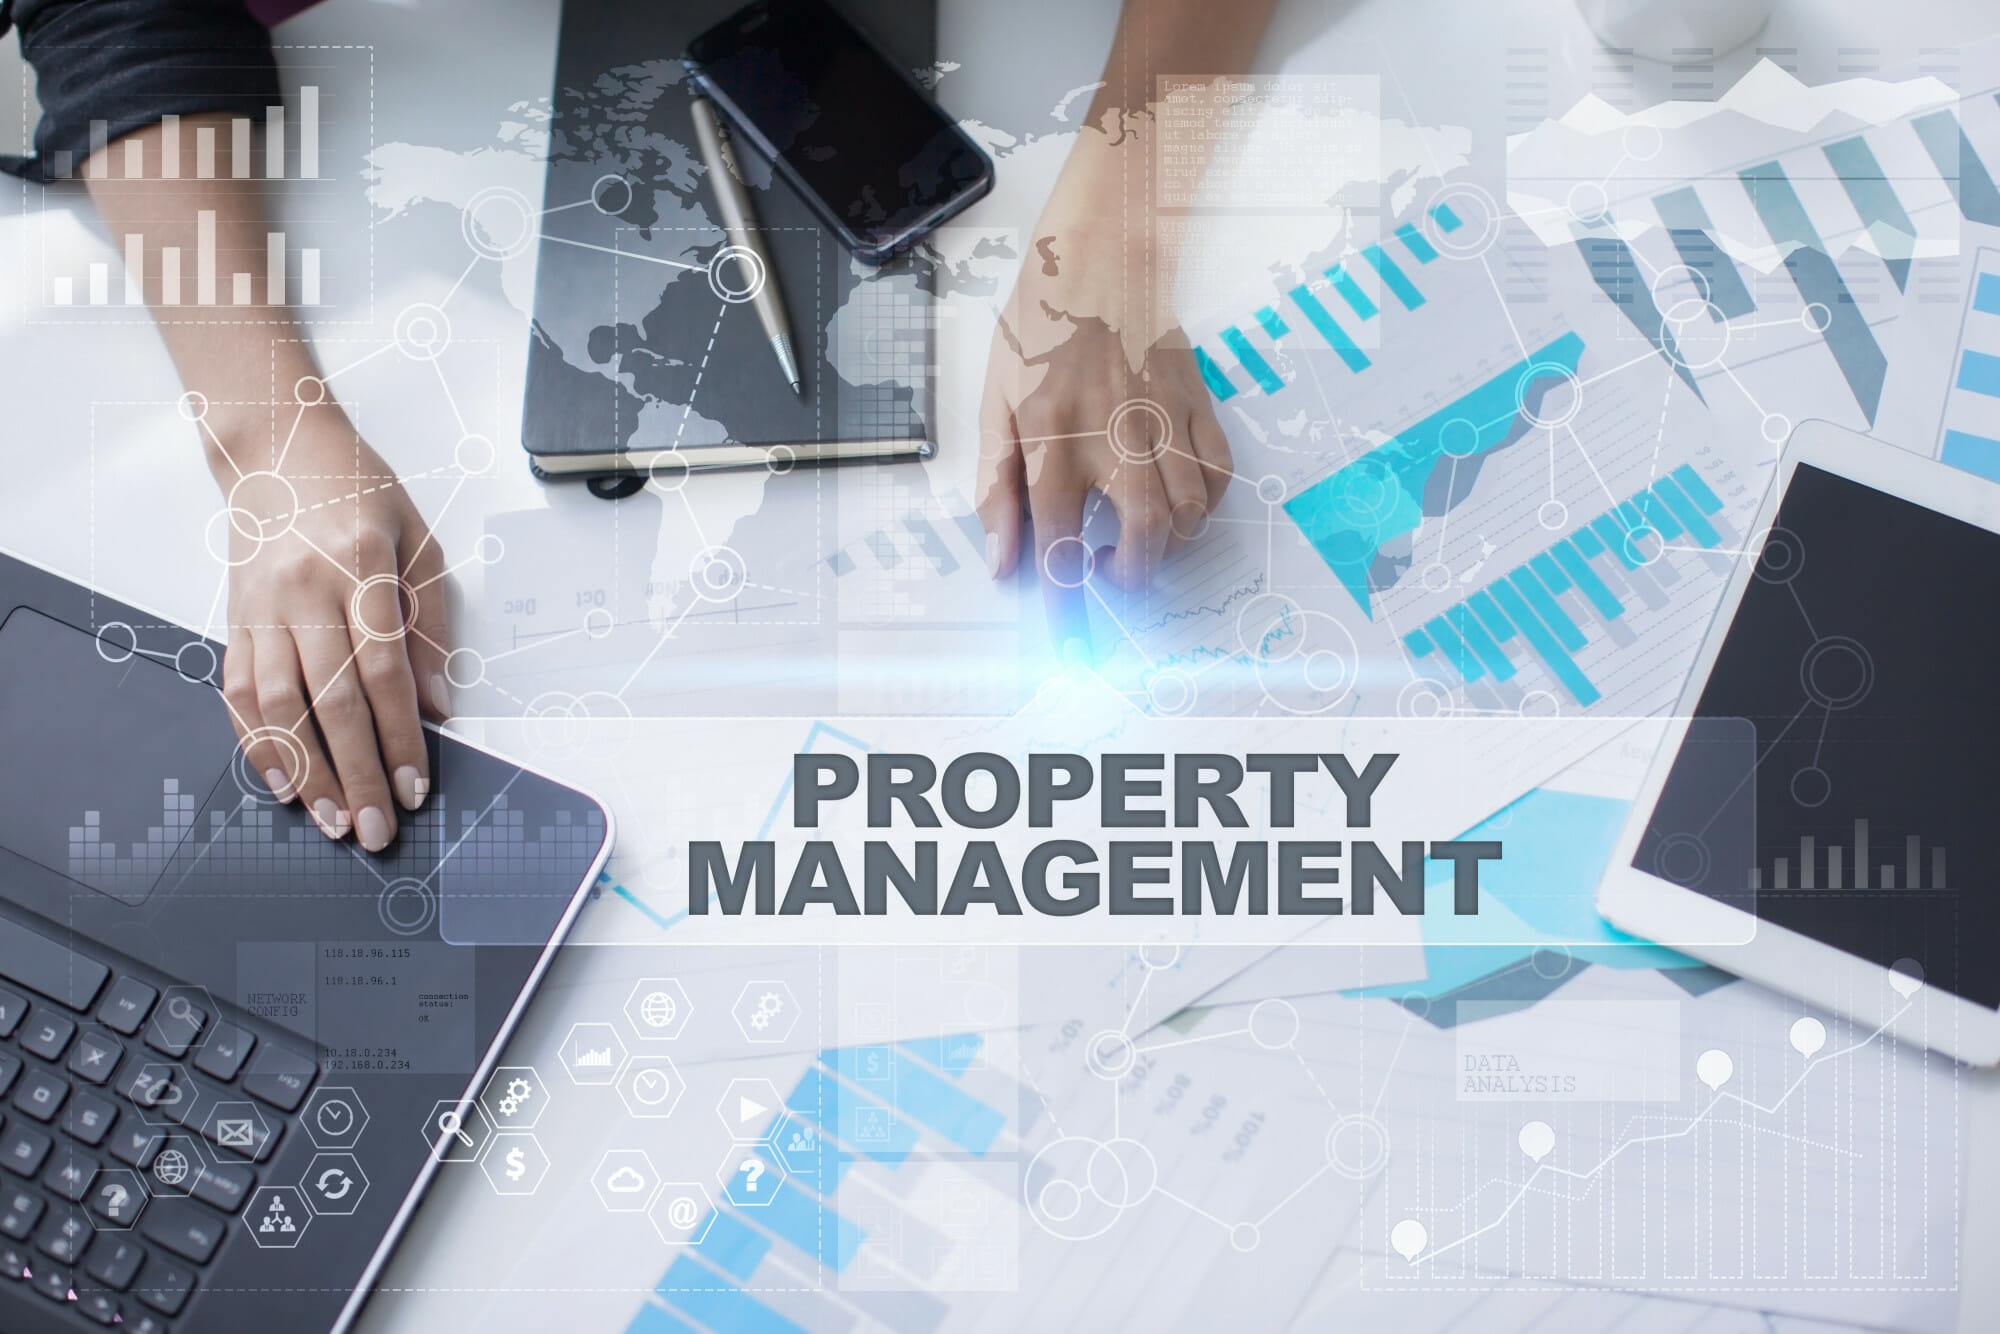 10 Property Management Marketing Ideas to Try